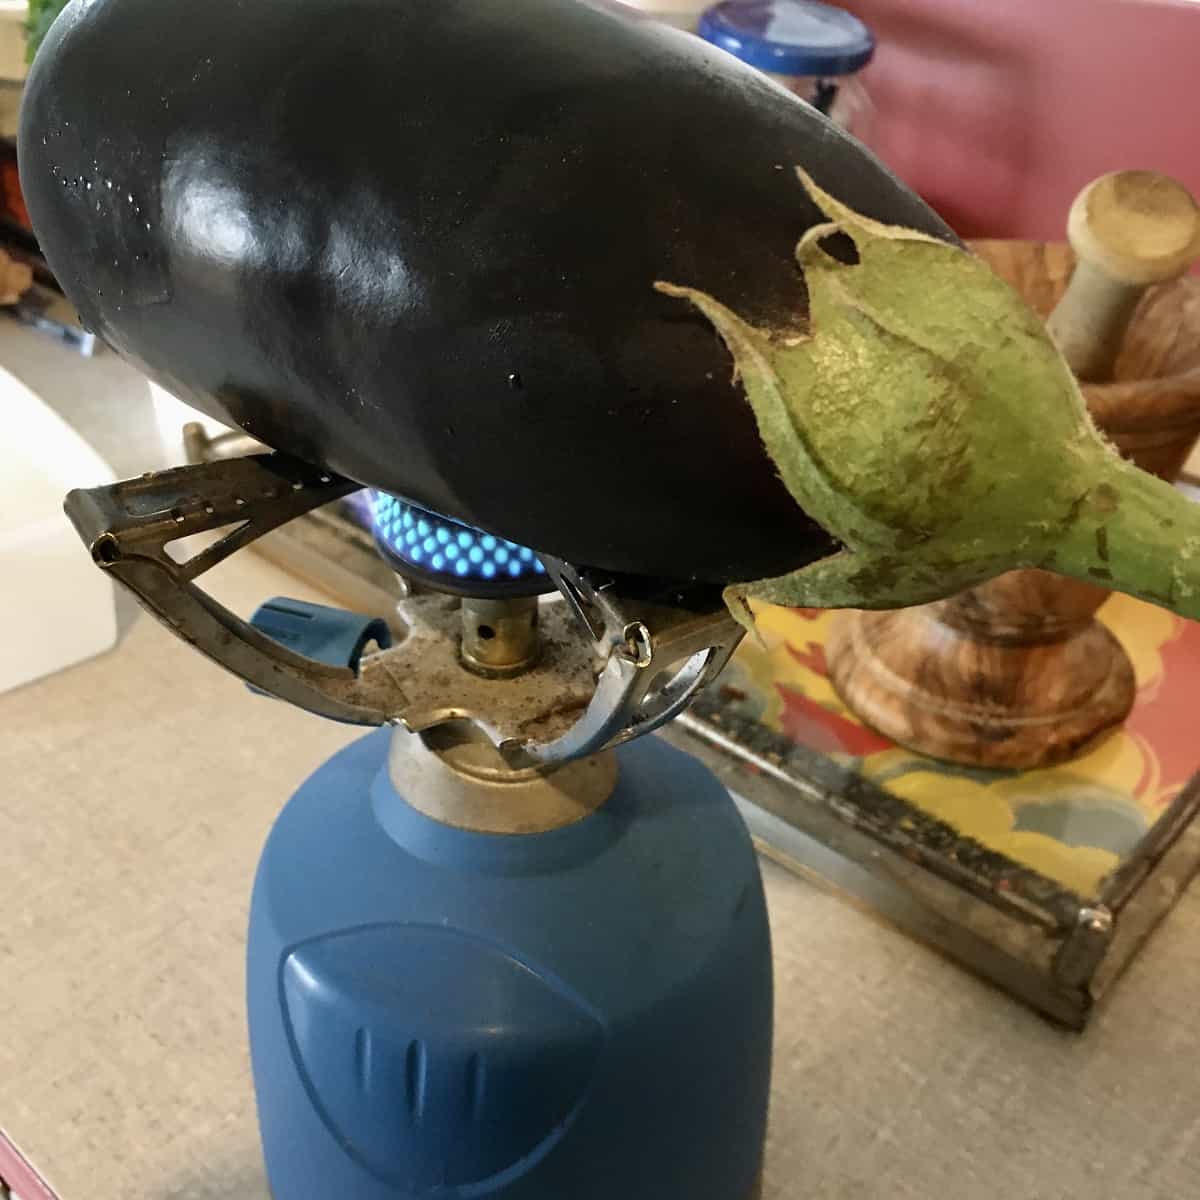 grilling an aubergine above open flame